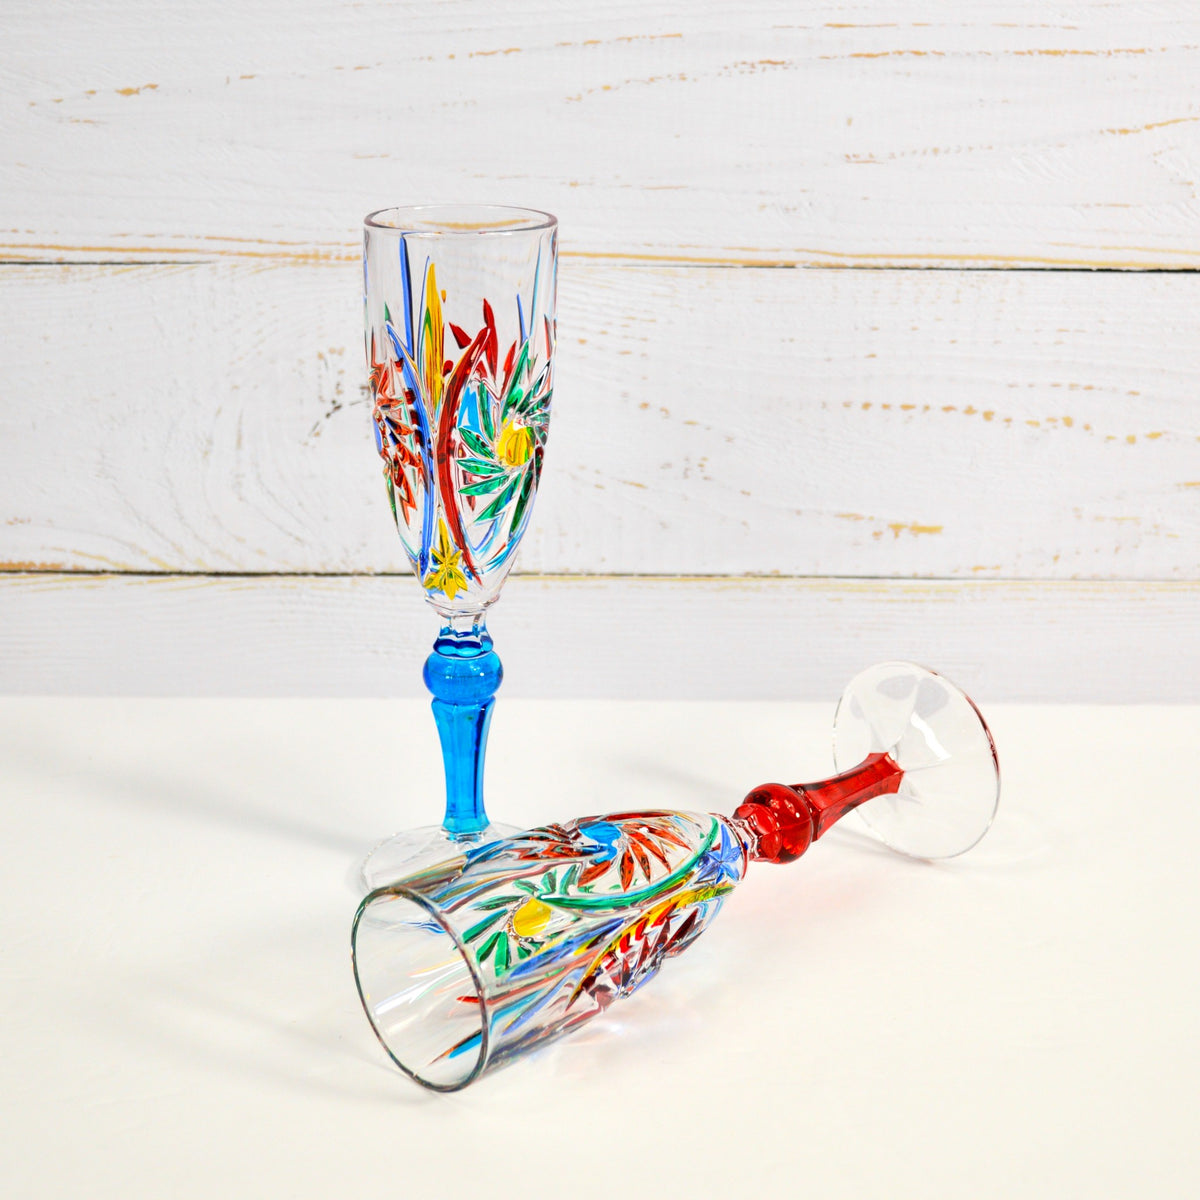 Twizzler Champagne Glasses, Set of 2, Made in Italy - My Italian Decor